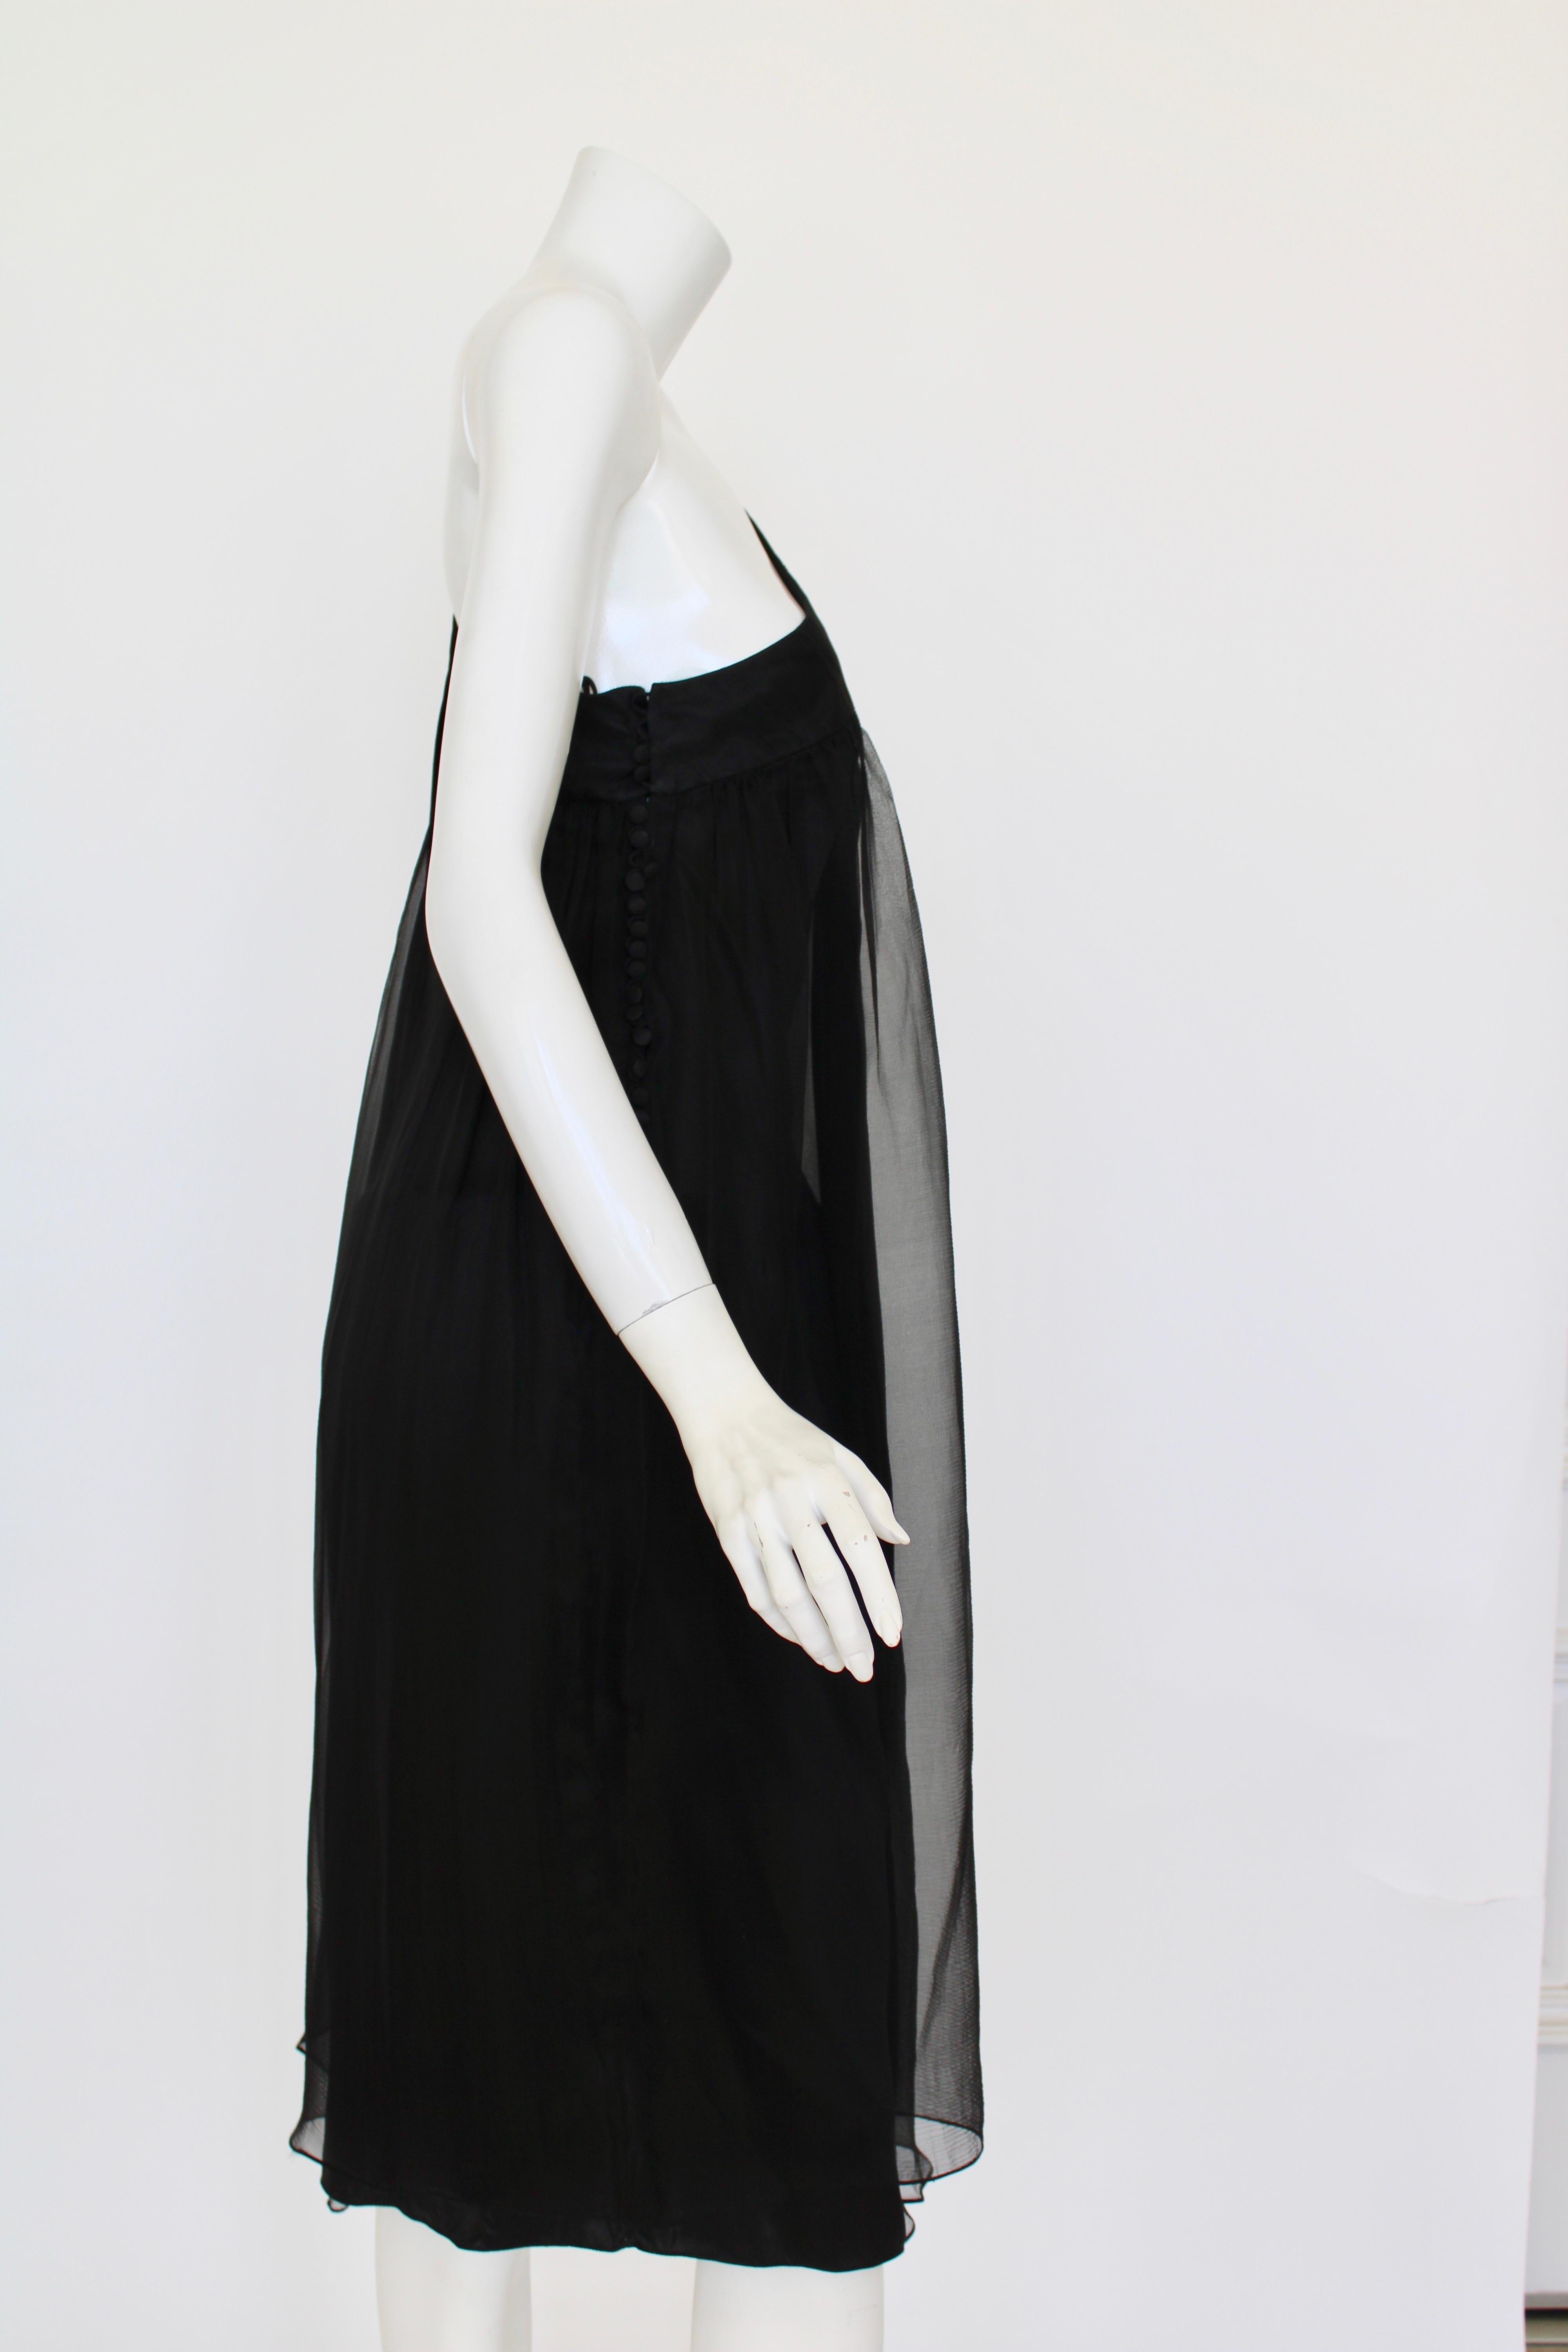 A beautiful and ethereal one shoulder dress from Christian Dior comprised of layers of sheer black silk. It has one shoulder with 2 panels of softly gathered silk falling and overlapping which can drape over the arm or leave it exposed. There is an